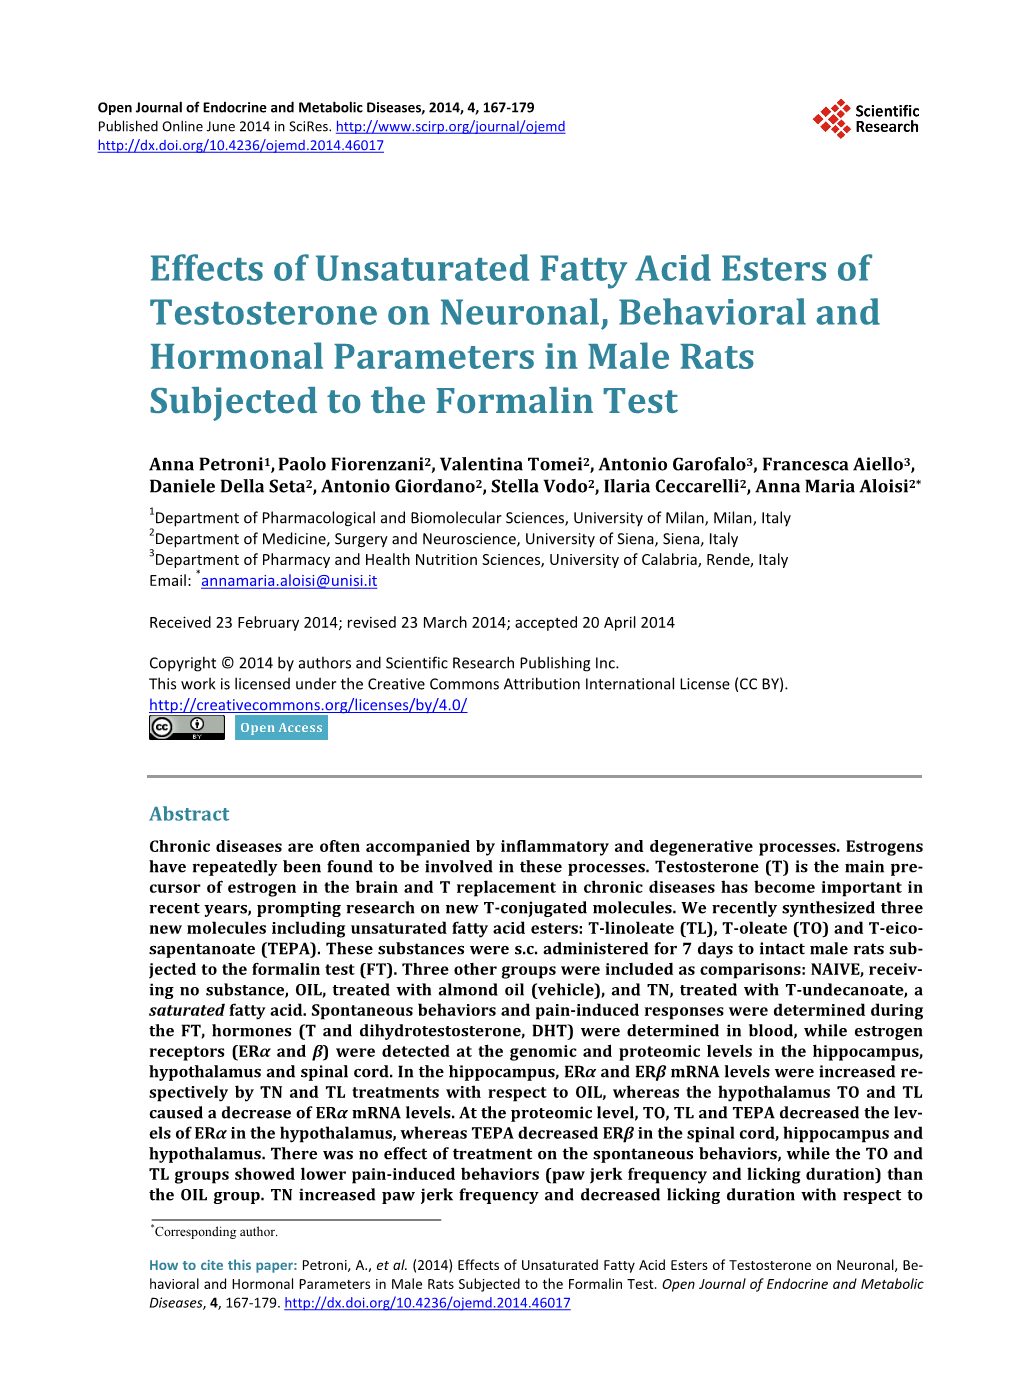 Effects of Unsaturated Fatty Acid Esters of Testosterone on Neuronal, Behavioral and Hormonal Parameters in Male Rats Subjected to the Formalin Test